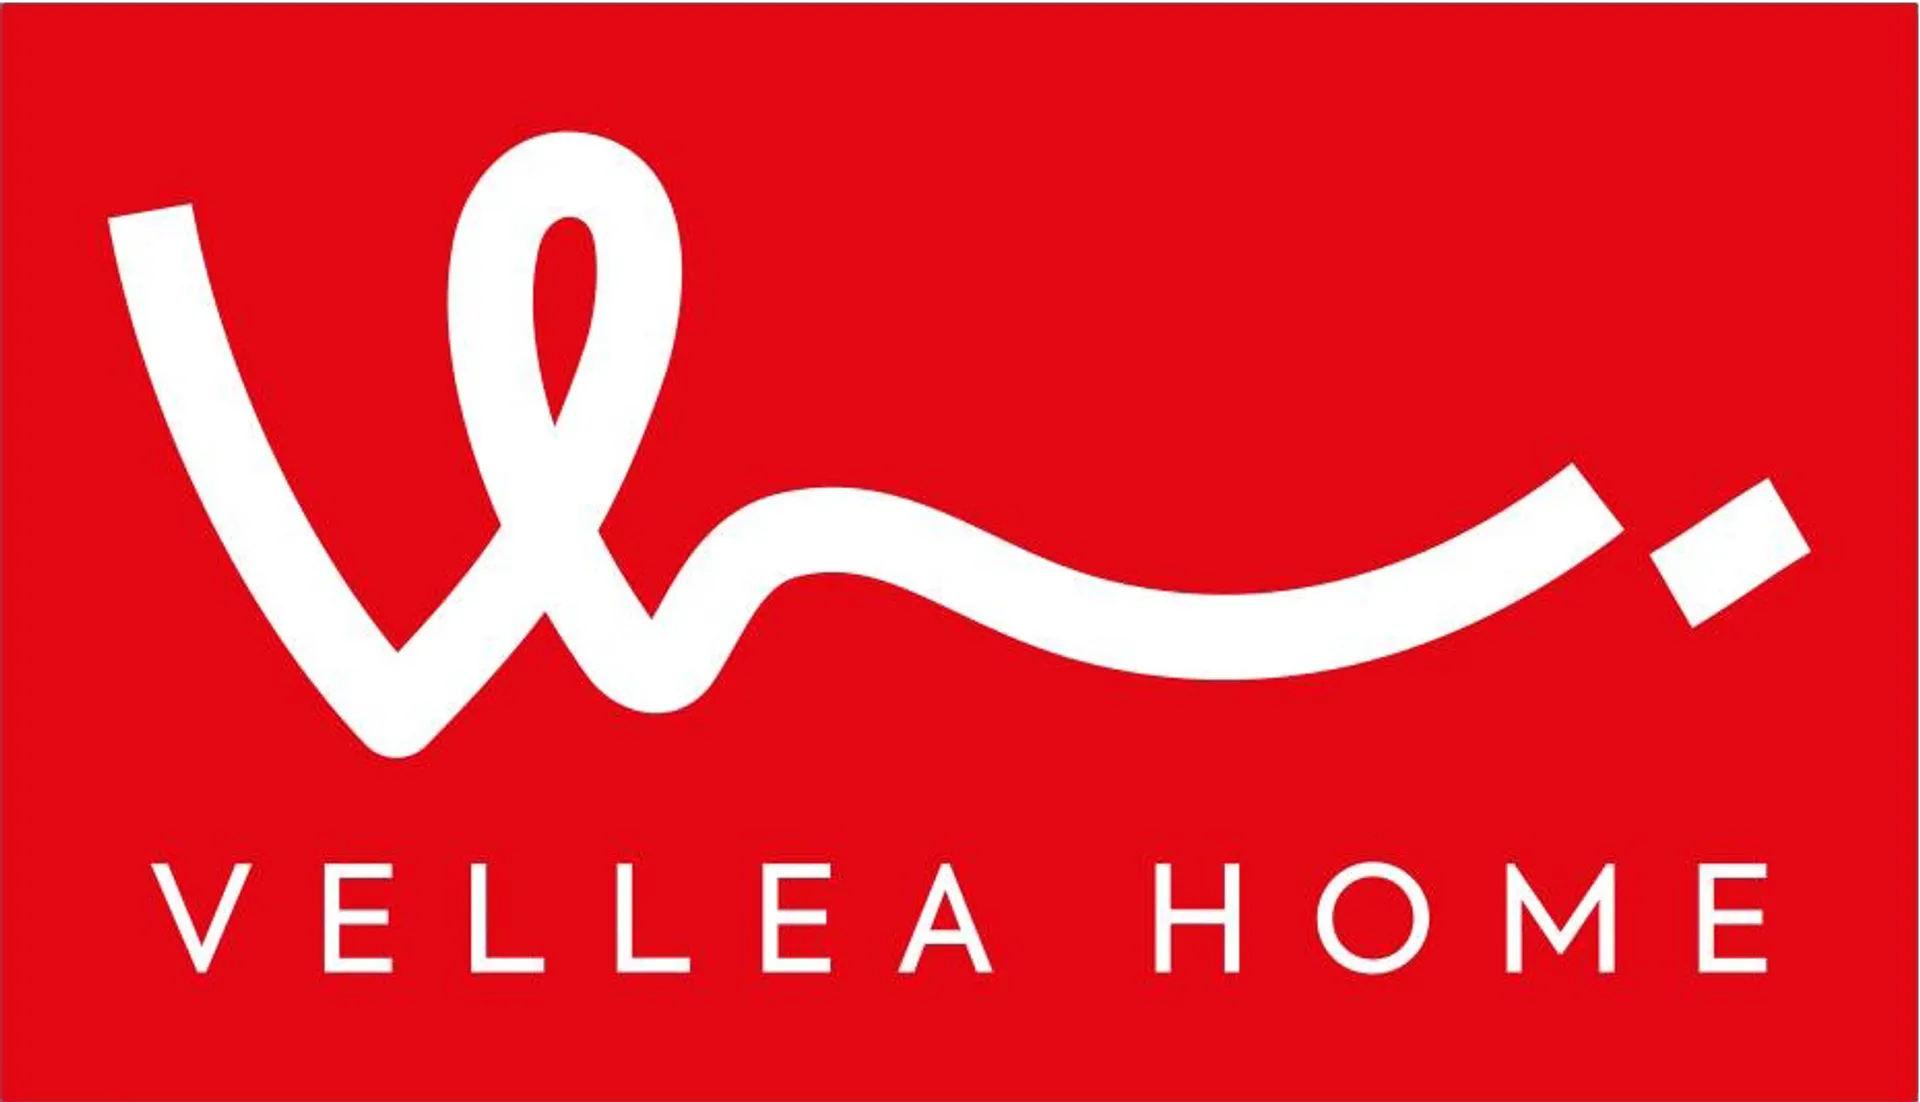 VELLEA HOME logo. Current weekly ad